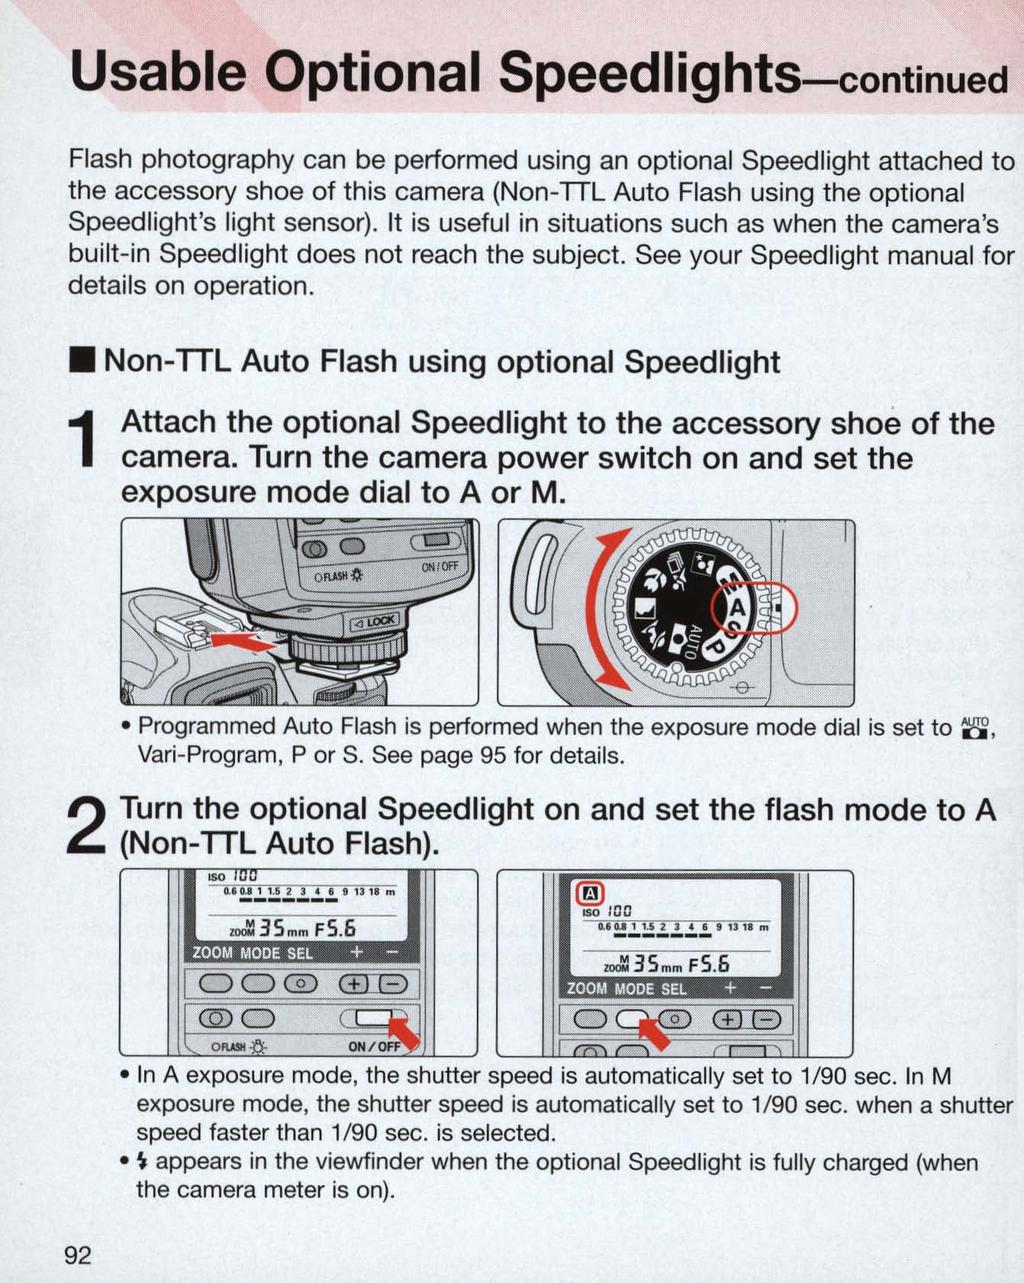 Usable Optional Speedlights-continued Flash photography can be performed using an optional Speedlight attached to the accessory shoe of this camera (Non-TTL Auto Flash using the optional Speedlight's